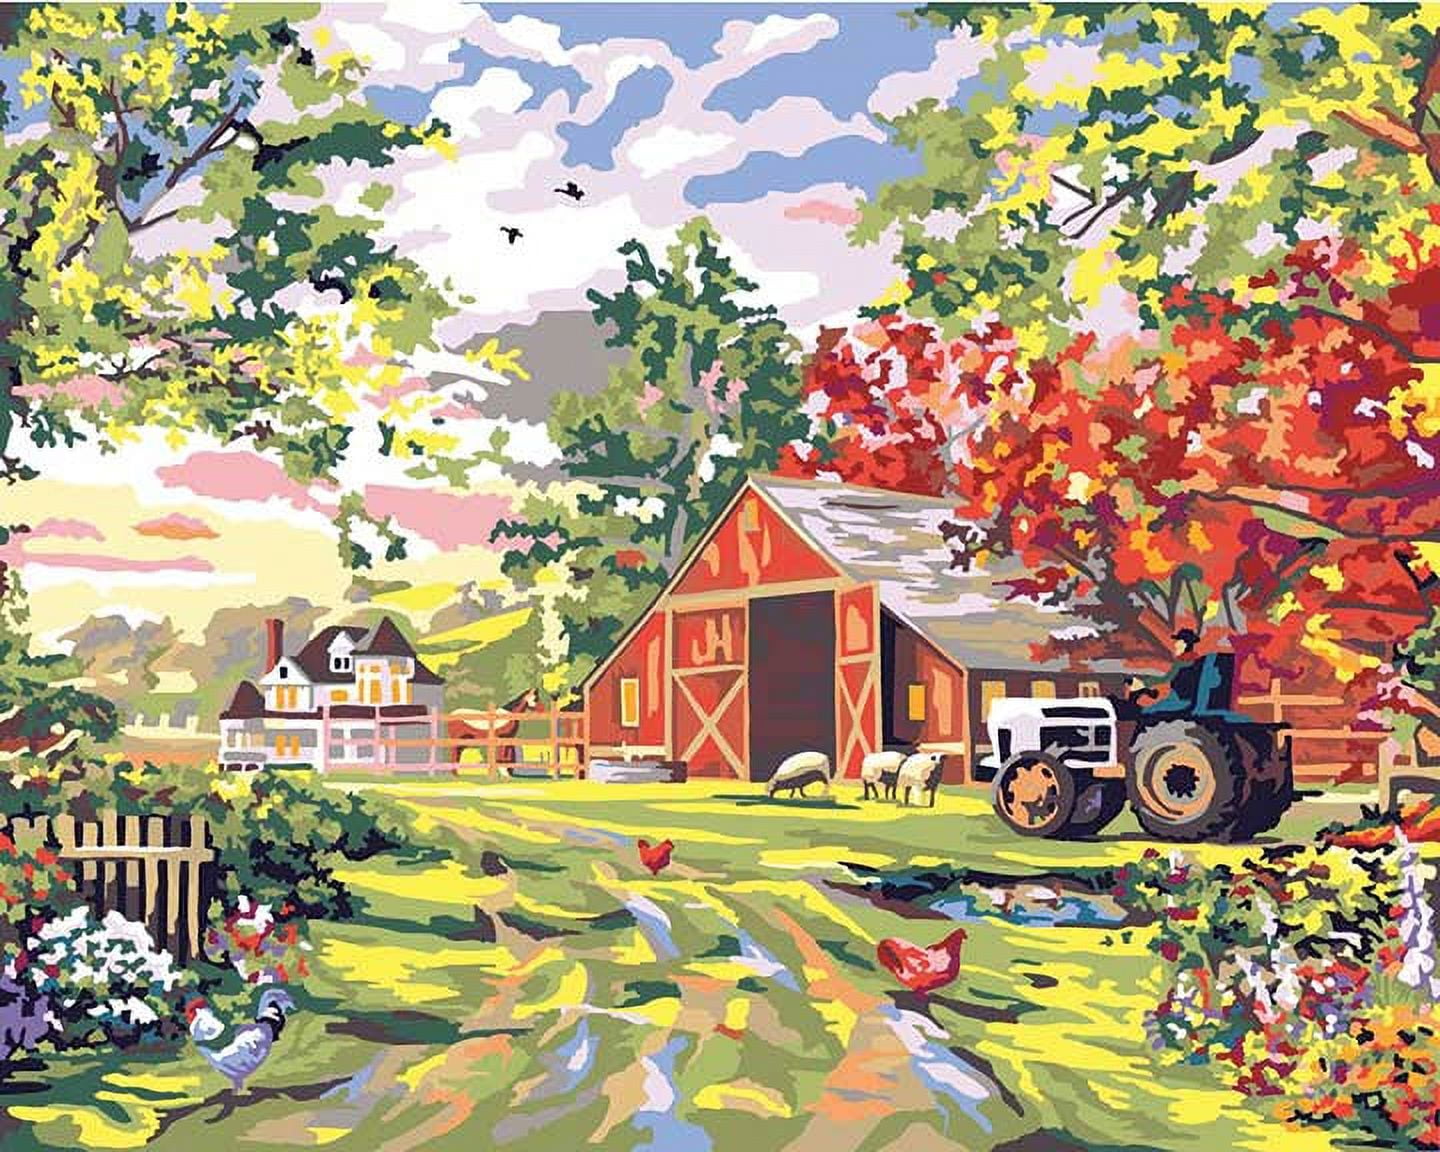 Plaid Paint by Number Kit, Old Farm House, 16 x 20